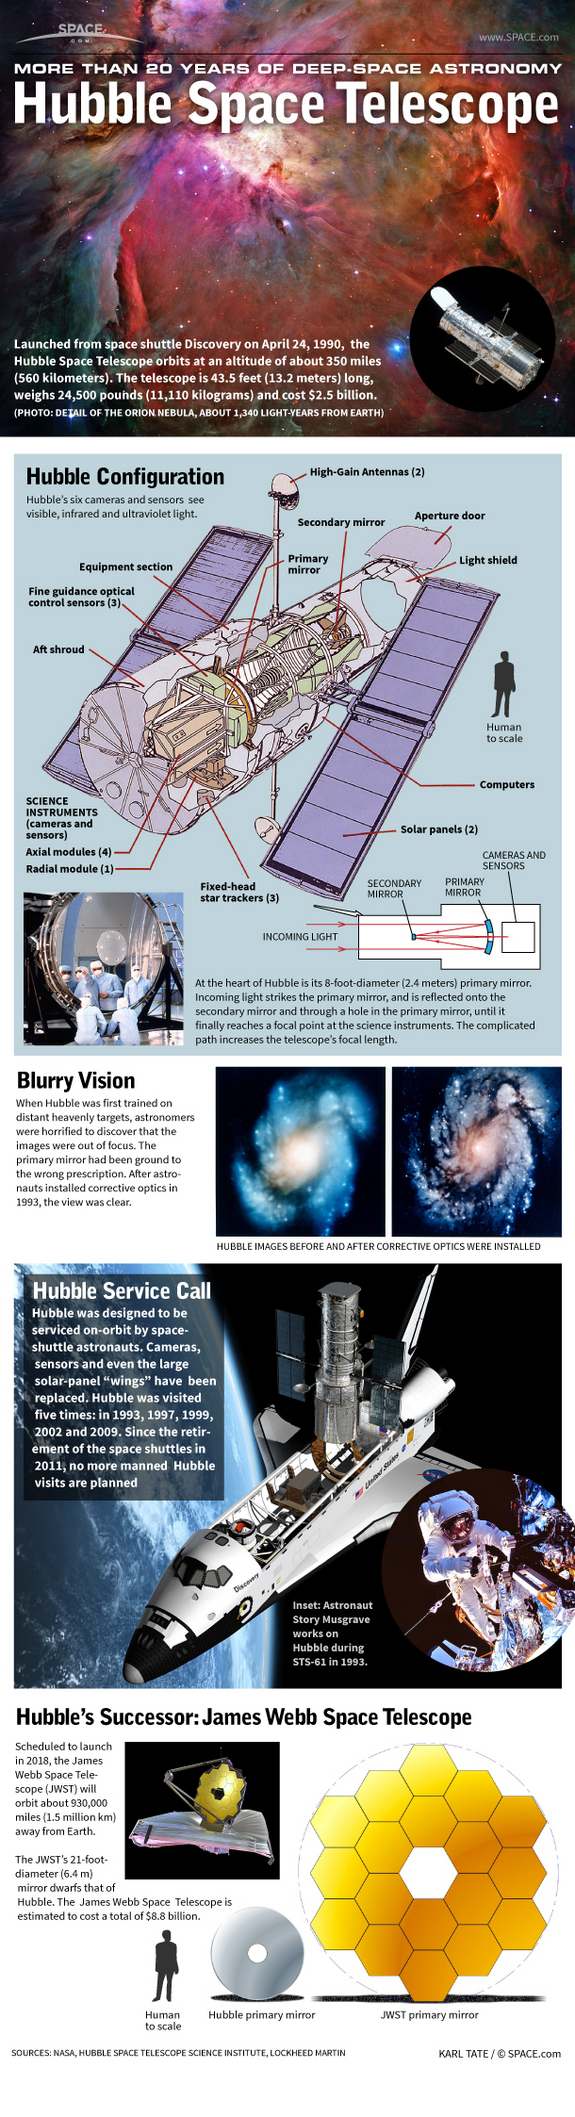 Find out how NASA's Hubble Space Telescope works in this SPACE.com infographic.